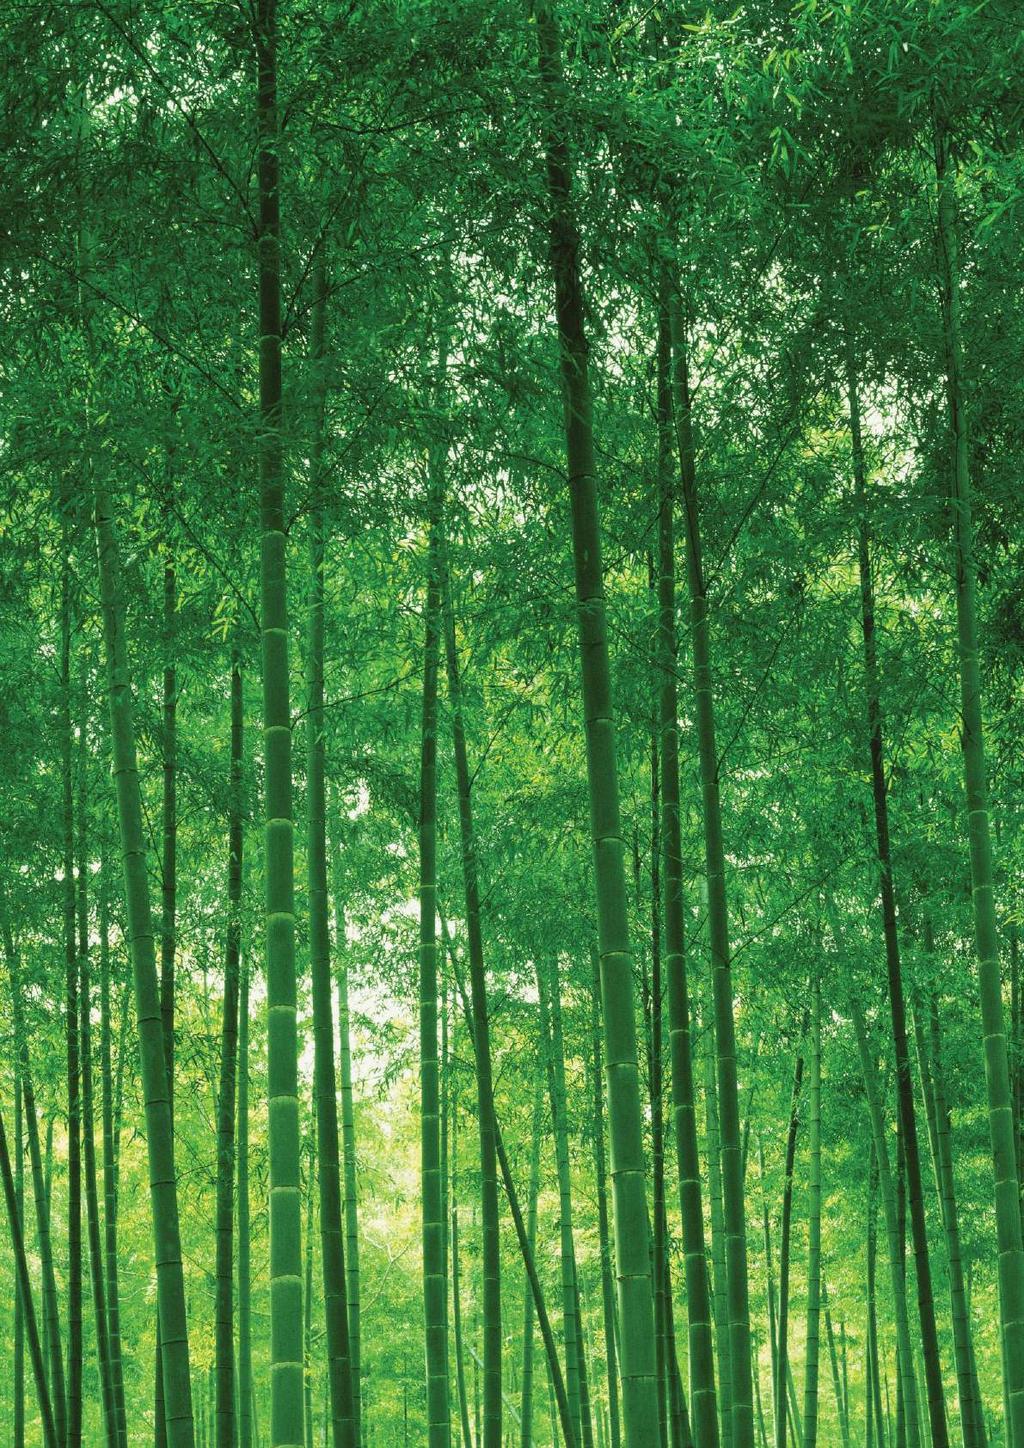 Summary Plantation is excited about the opportunity to work with you. Please contact any of our team members to discuss your project and potential options further. Think bamboo, think Plantation!